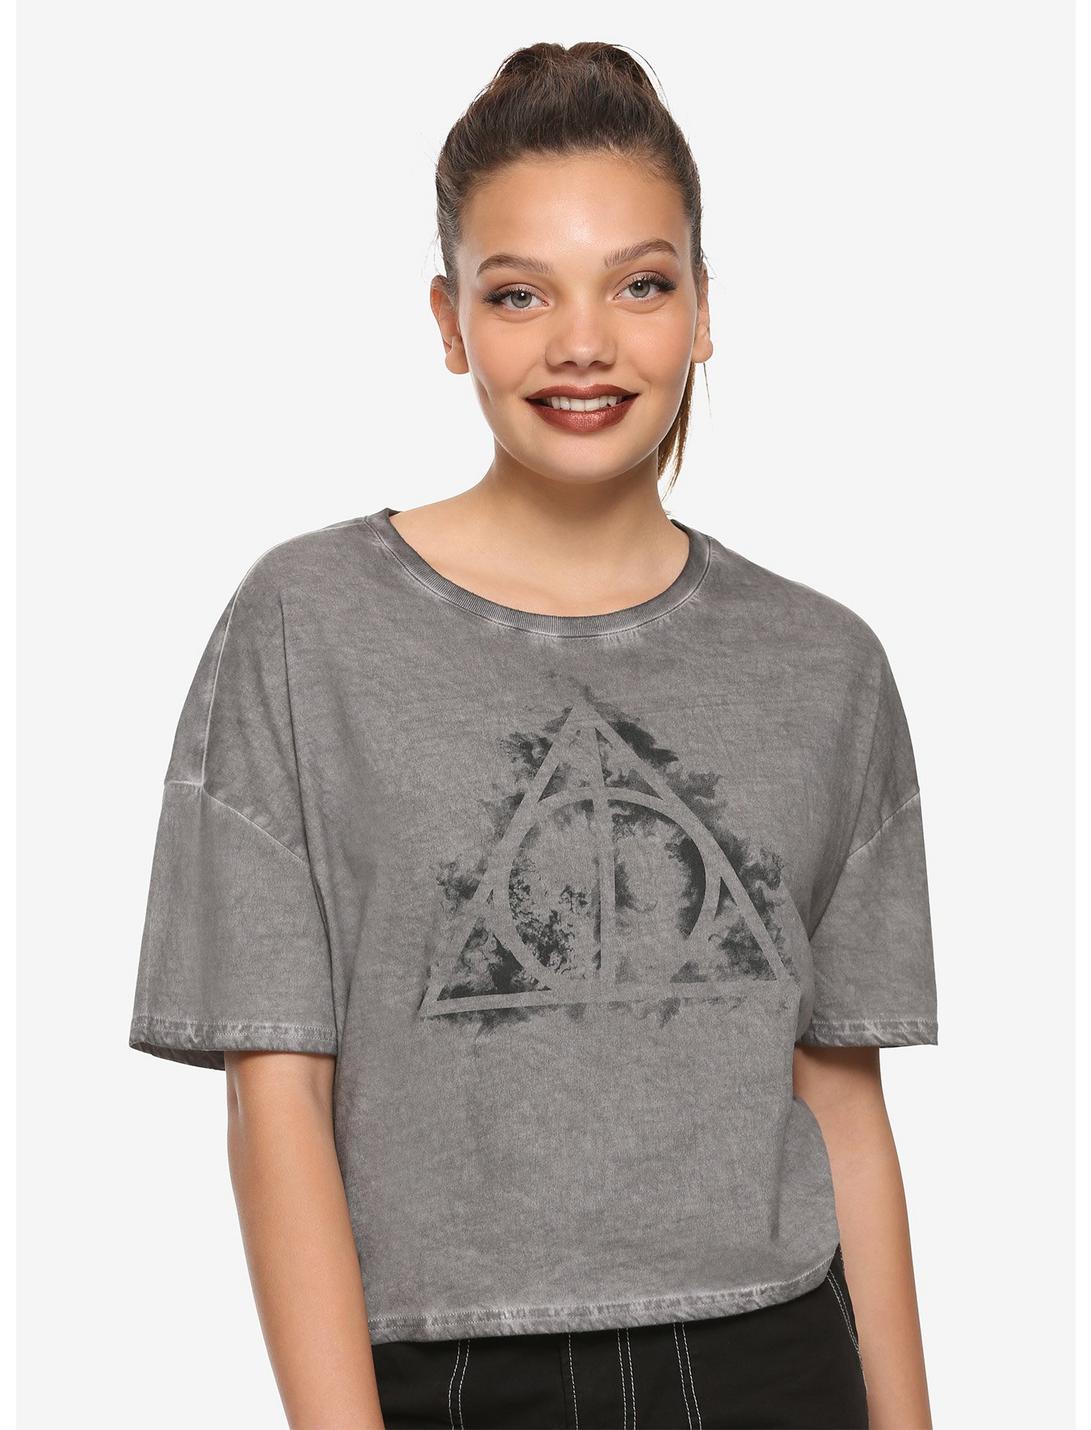 Fantastic Beasts: The Crimes Of Grindelwald Deathly Hallows Lace-Up Girls Crop Top Hot Topic Exclusive, BLACK, hi-res